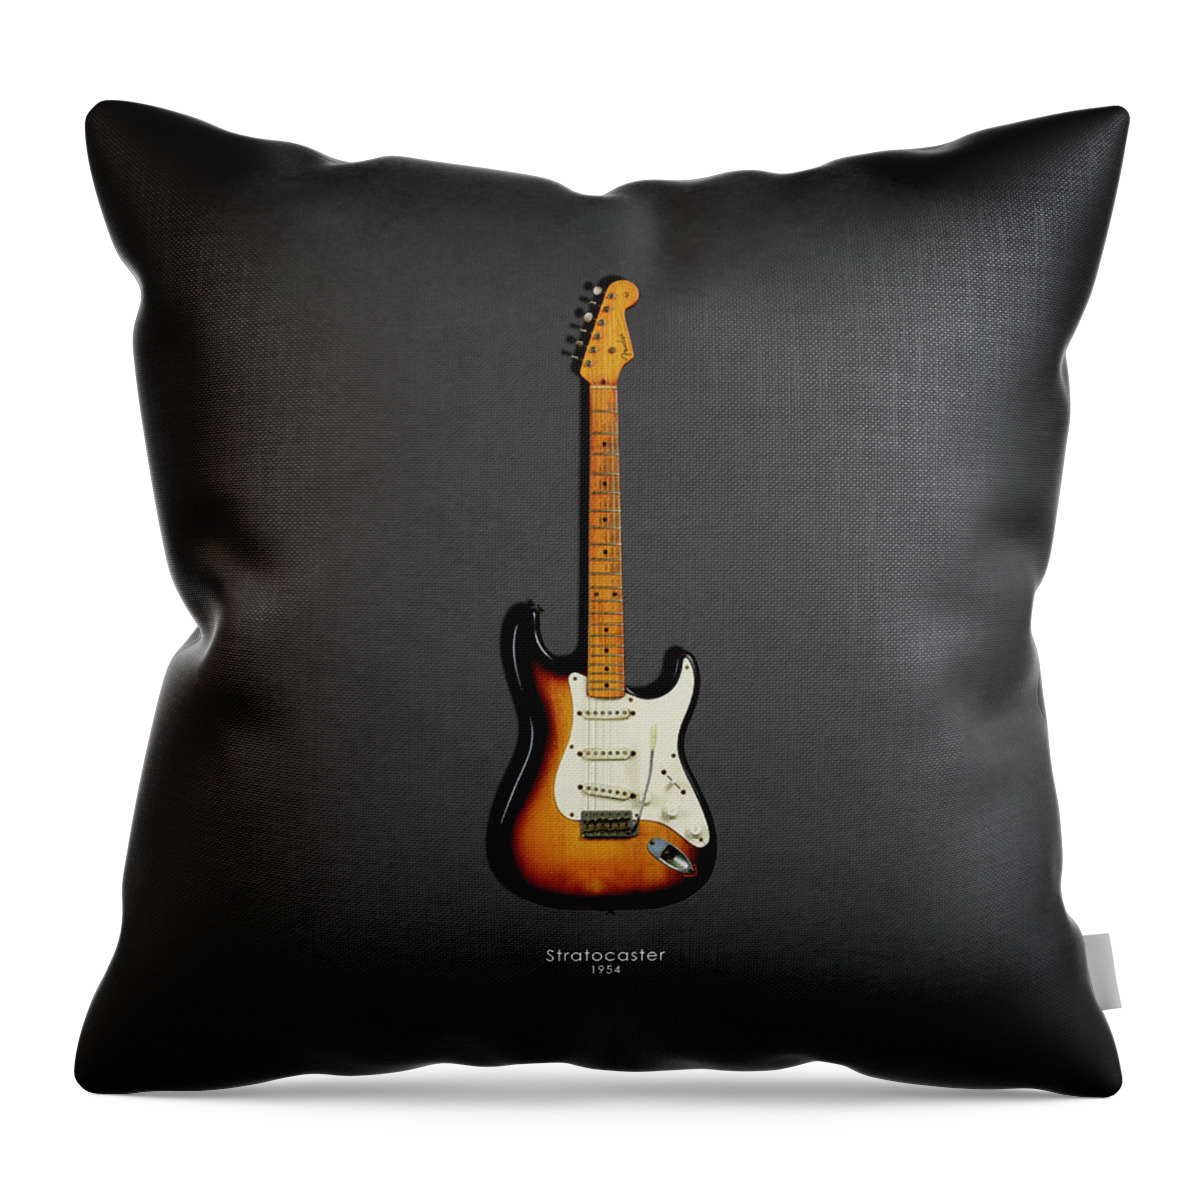 #faatoppicks Throw Pillow featuring the photograph Fender Stratocaster 54 by Mark Rogan